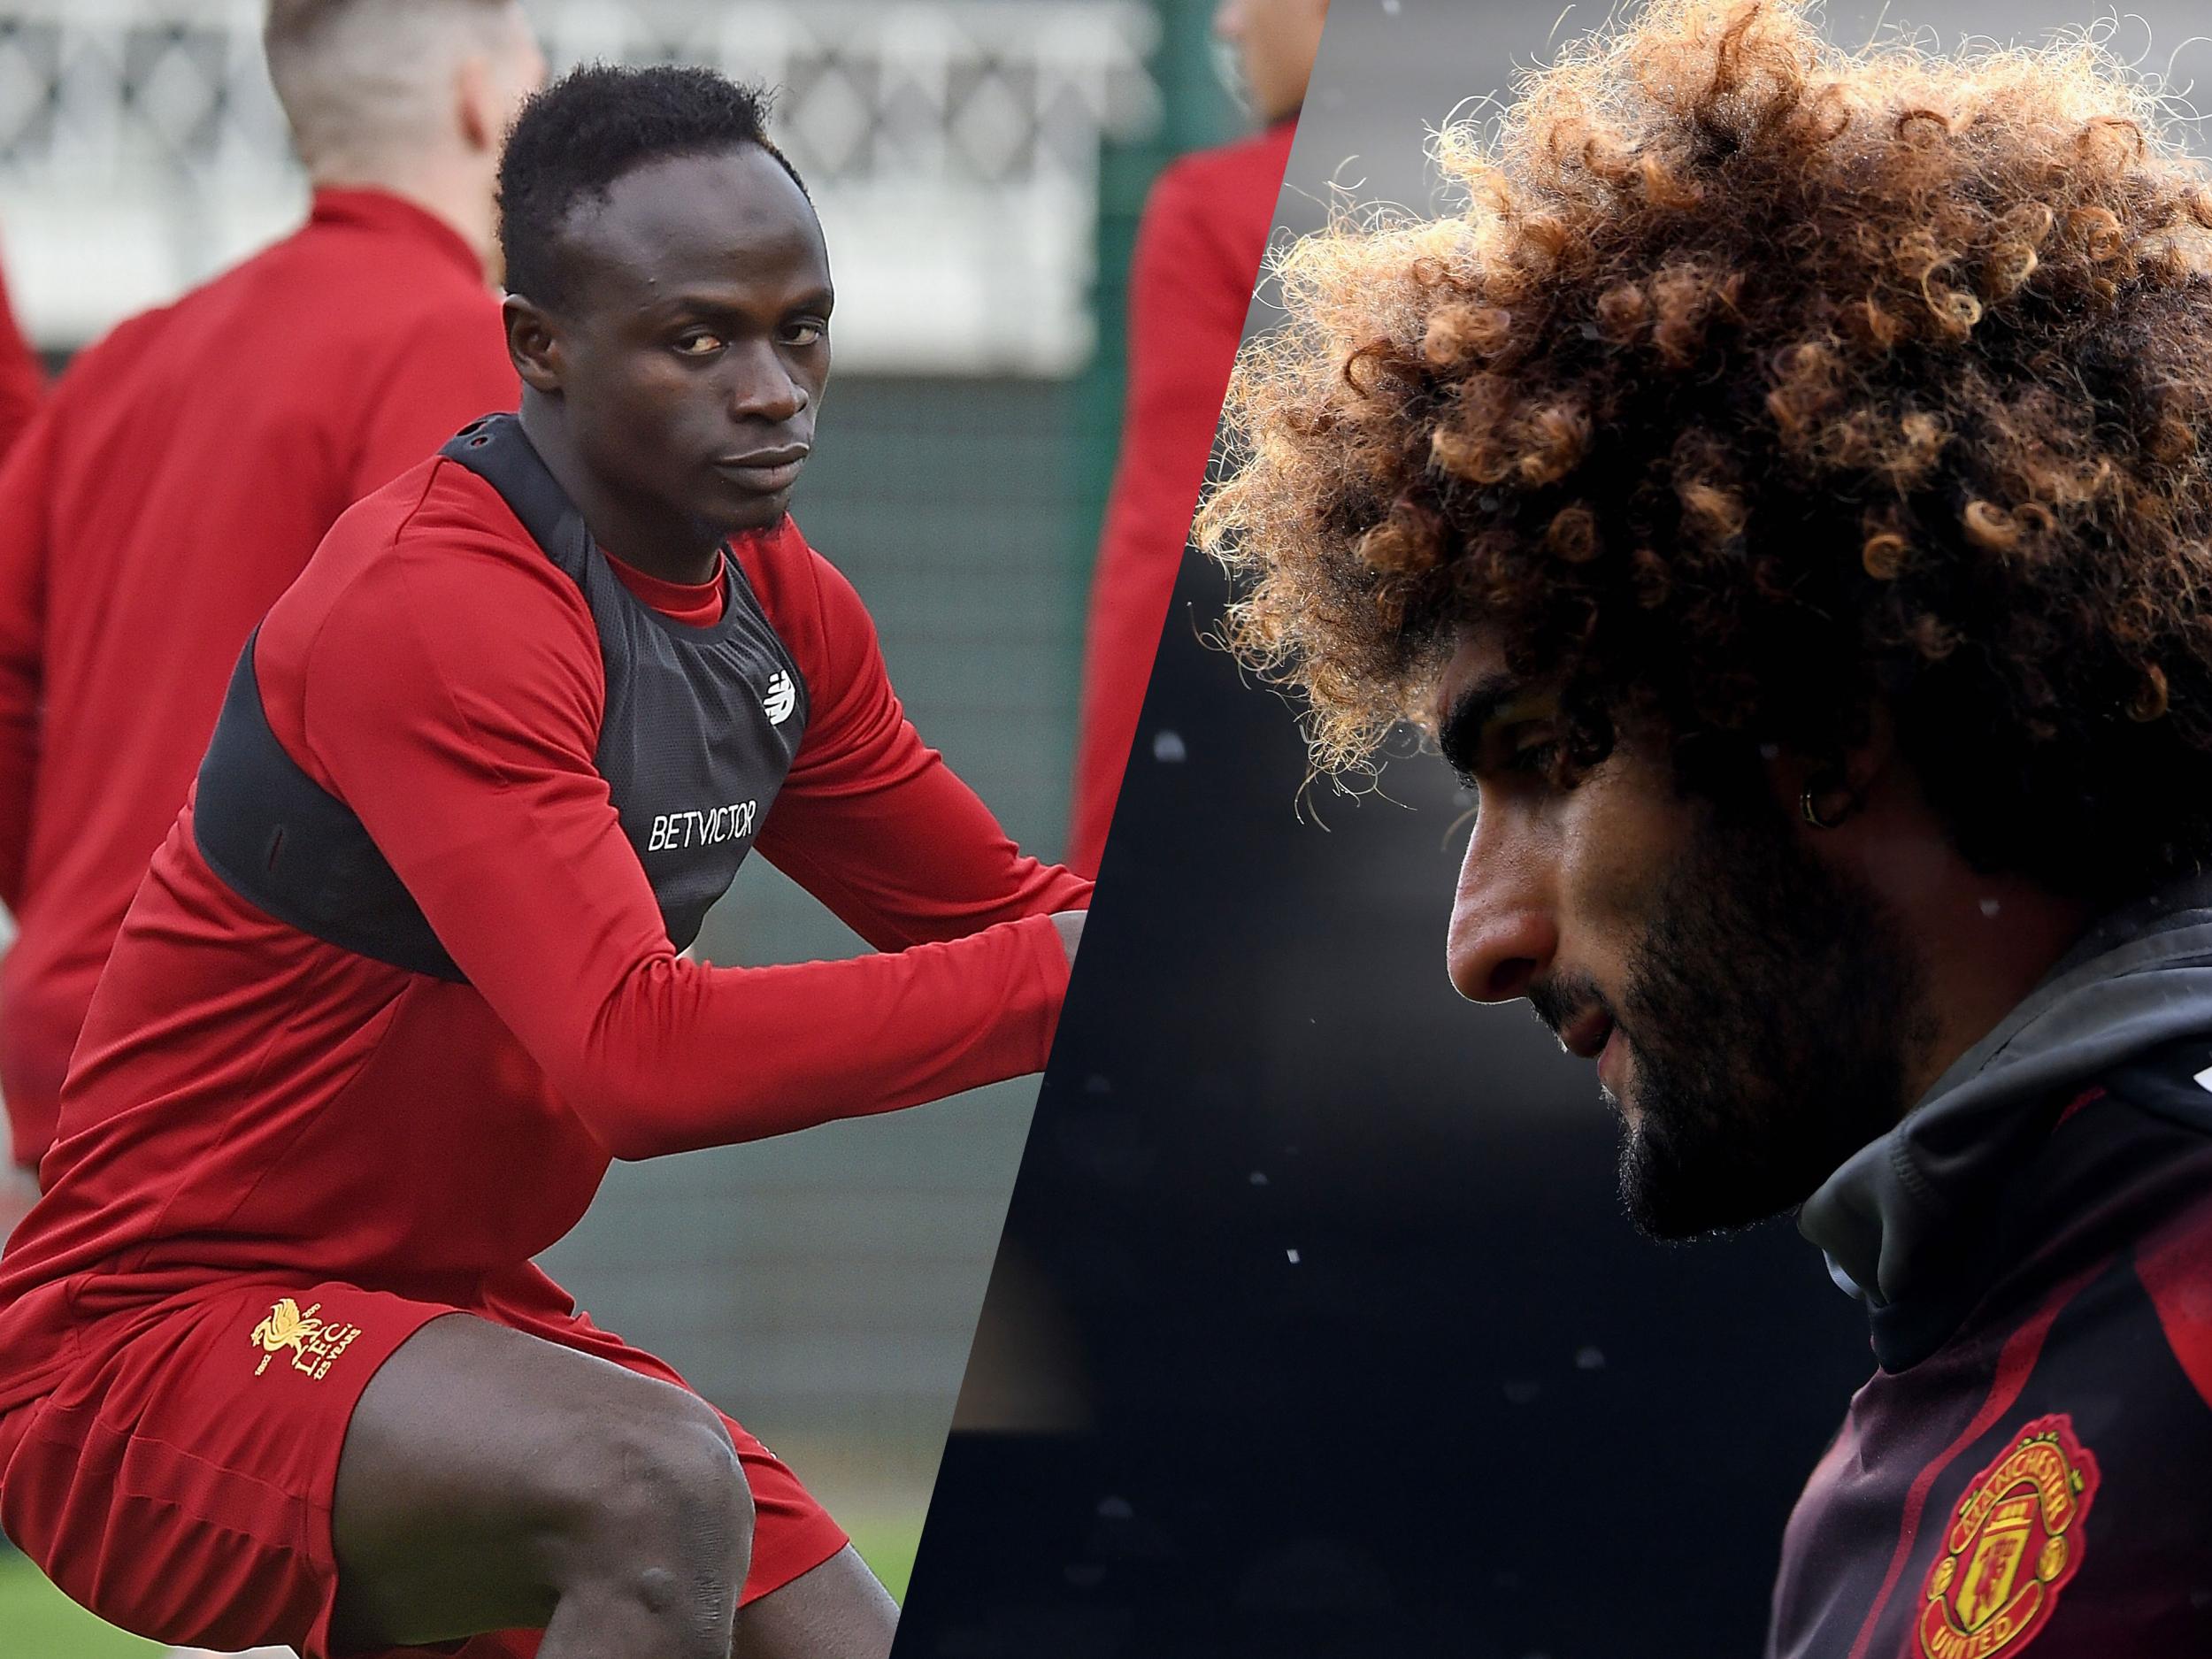 Sadio Mané and Marouane Fellaini have been ruled out of Saturday's meeting